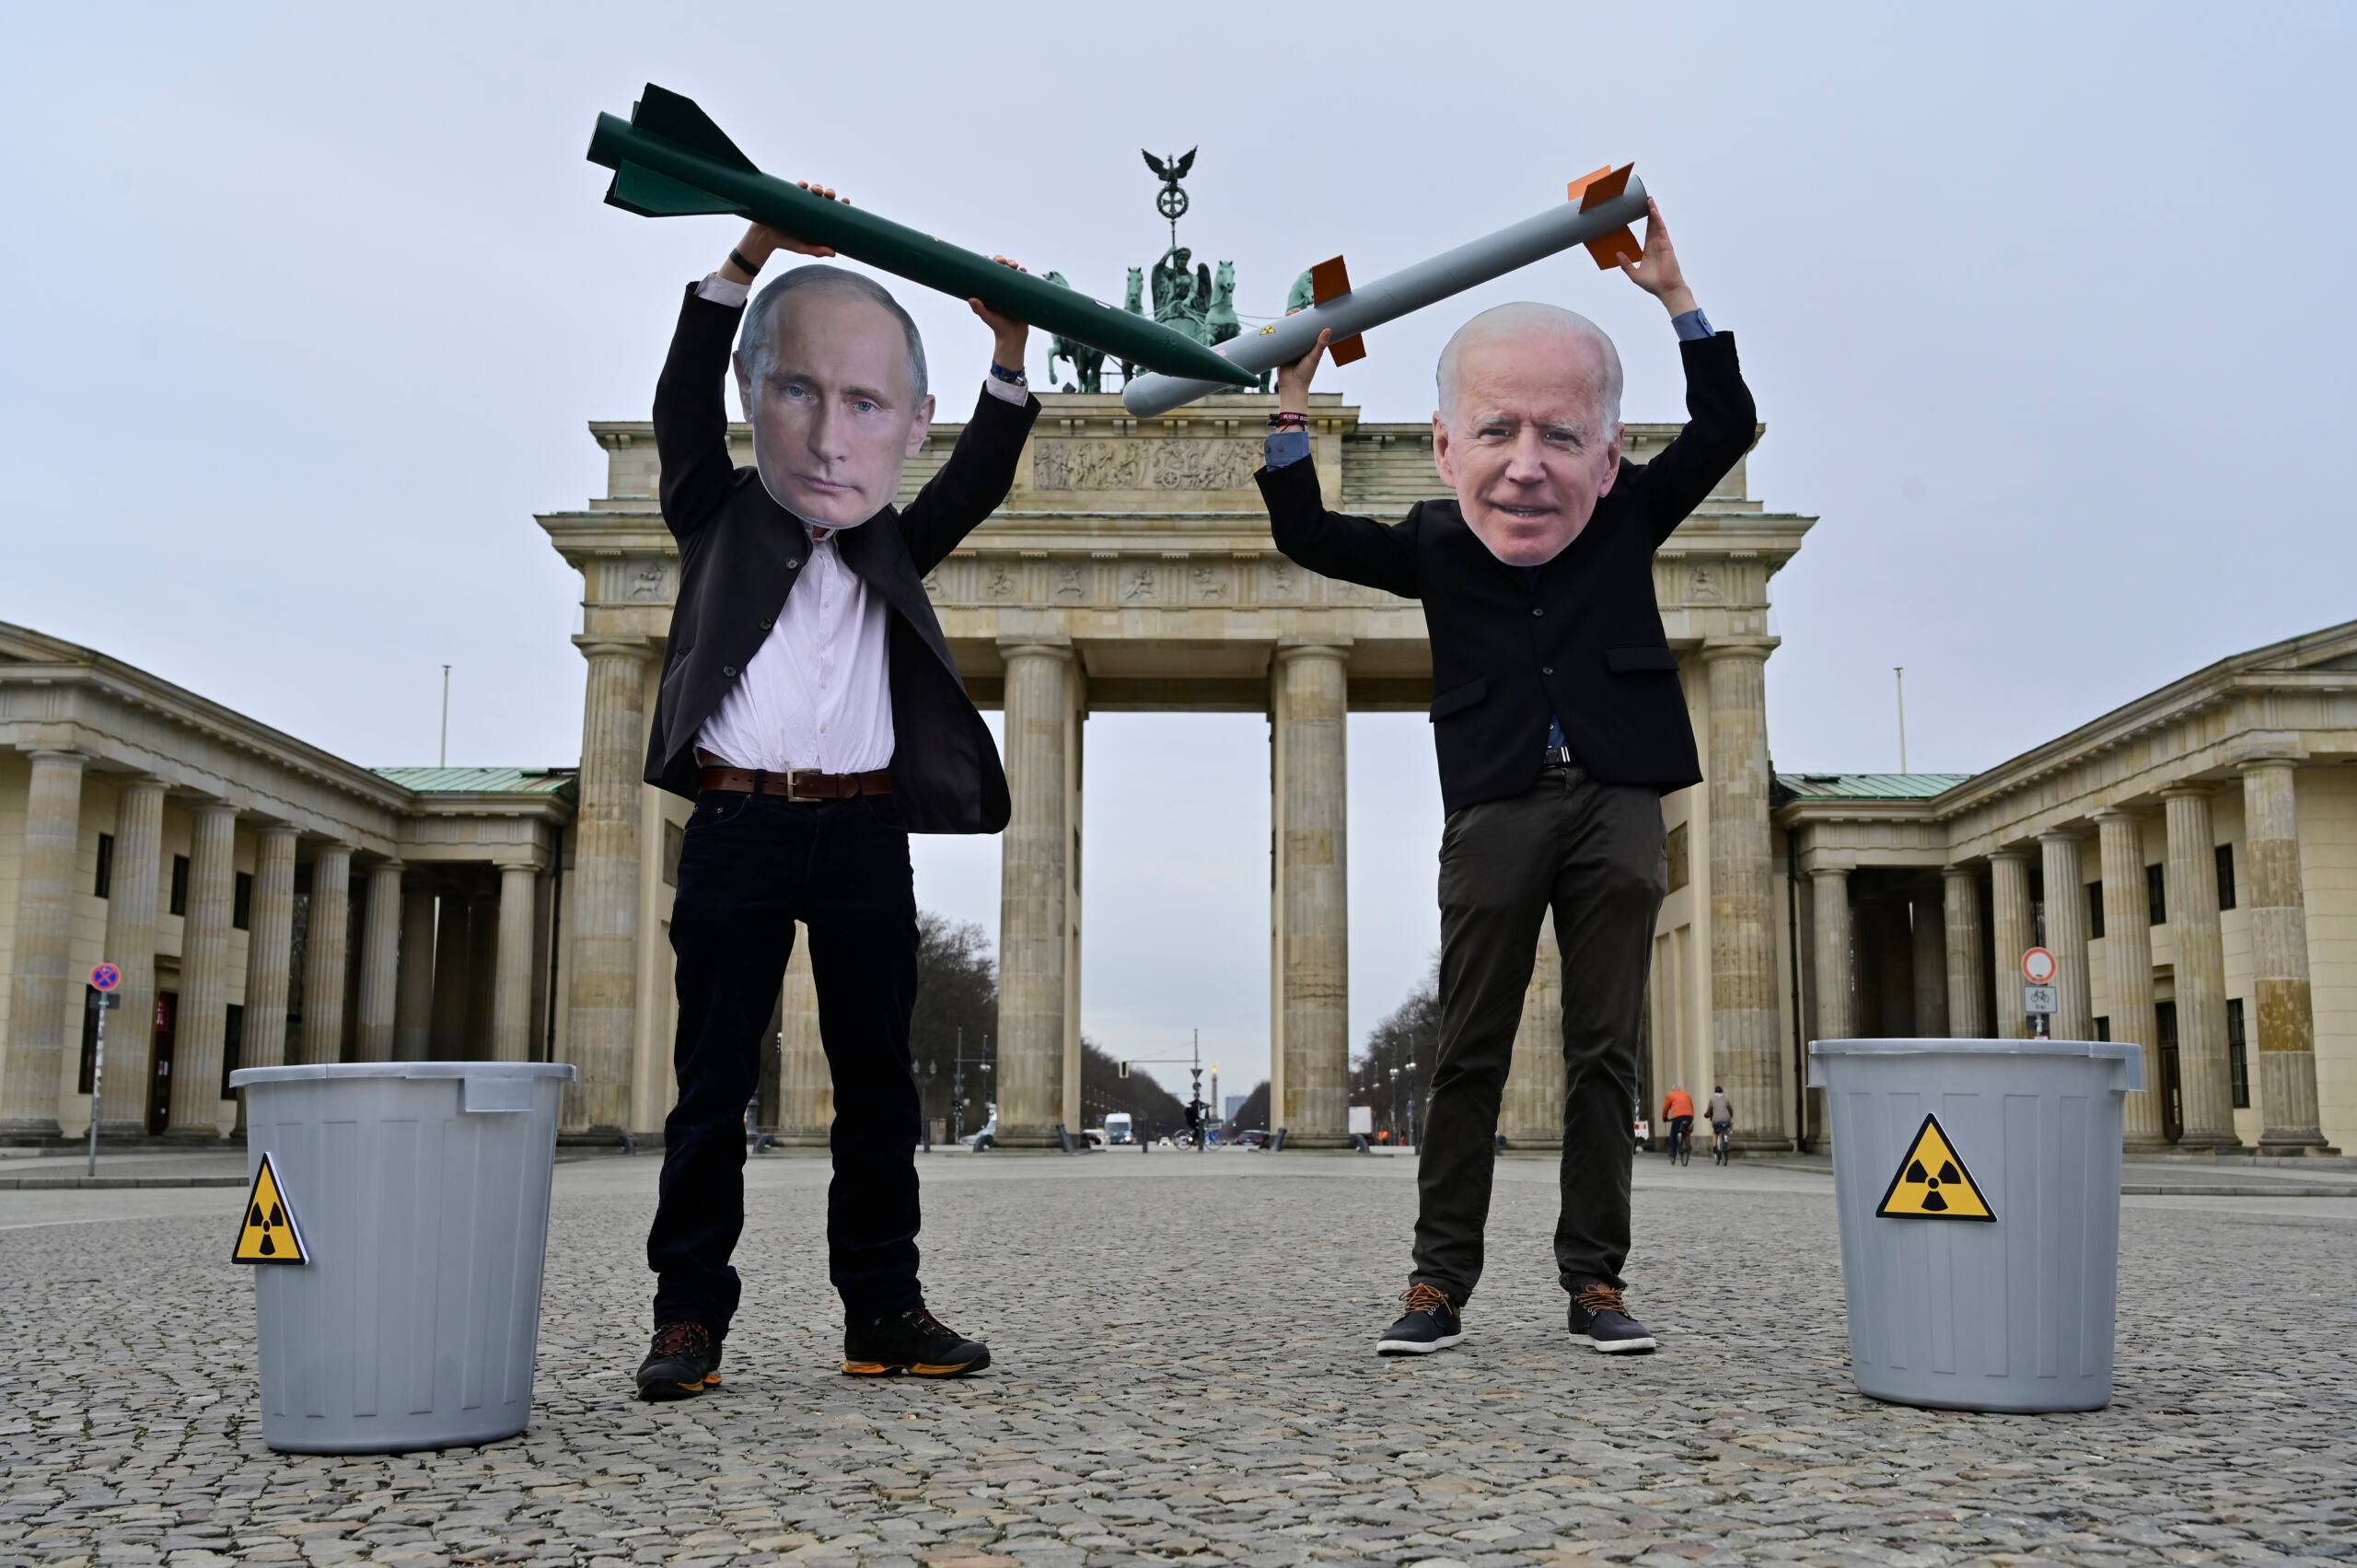 Peace activists wearing masks of Russian President Vladimir Putin (L) and newly elected US President Joe Biden pose with mock nuclear missiles in front of Berlin's landmark the Brandenburg Gate on January 29, 2021 in an action to call for more progress in nuclear disarmament. - The Russian parliament on January 27, 2021 unanimously voted to ratify an agreement to extend by five years a key nuclear pact with the United States that was set to expire soon. Signed in 2010, the New START contract caps to 1,550 the number of nuclear warheads that can be deployed by Moscow and Washington, which control the world's largest nuclear arsenals. The agreement, which was due to expire on February 5, is seen as a rare opportunity for compromise between Moscow and Washington, whose ties have dramatically deteriorated in recent years. (Photo by John MACDOUGALL / AFP)